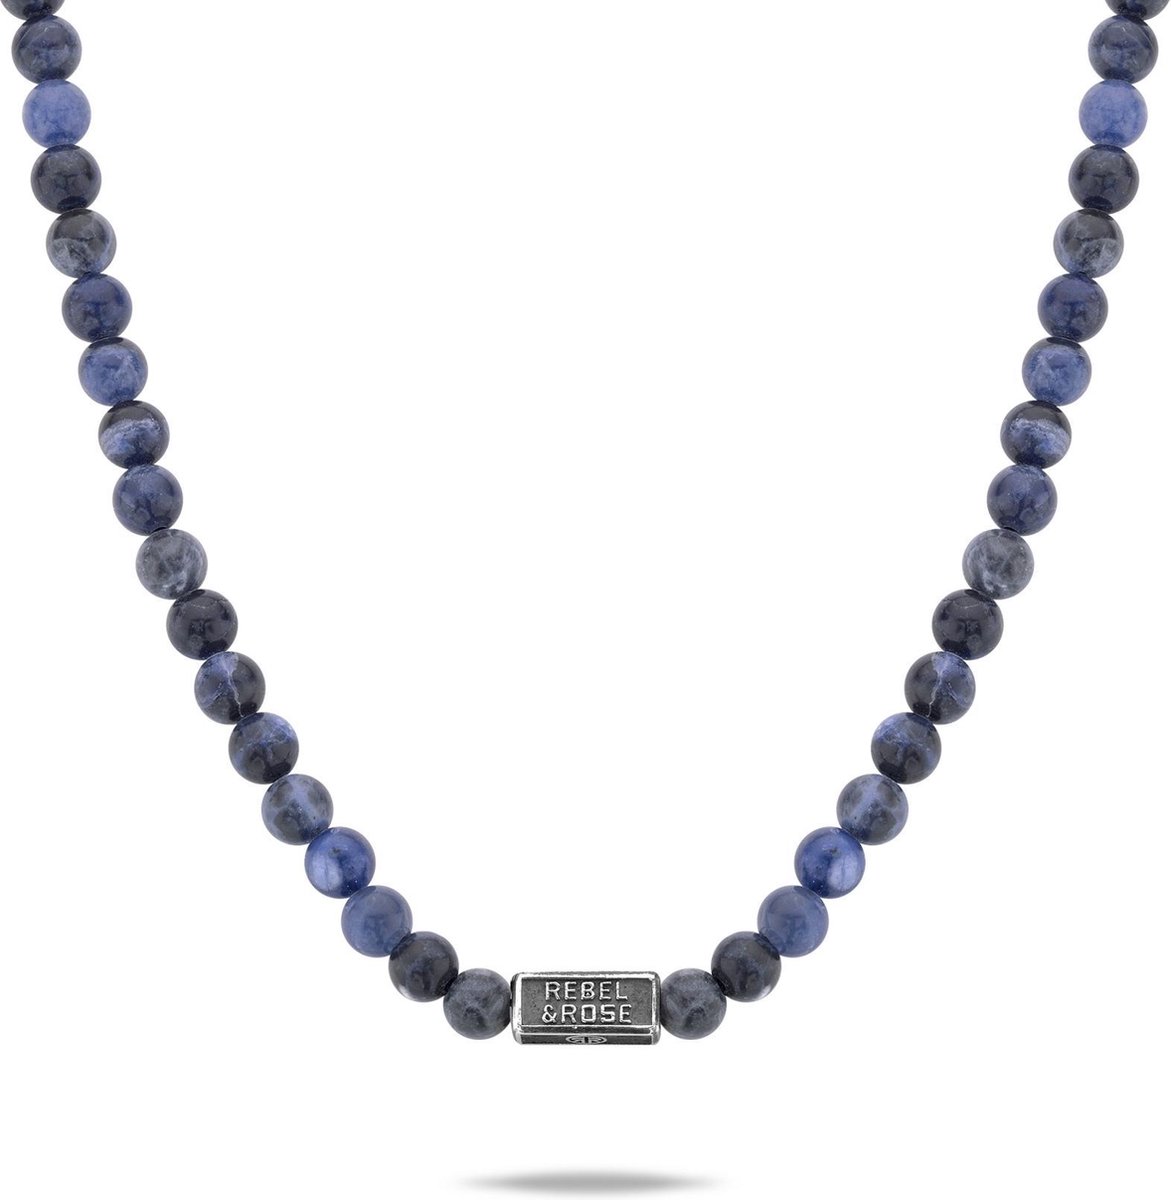 Rebel&Rose collier - Necklace Midnight Blue - 6mm